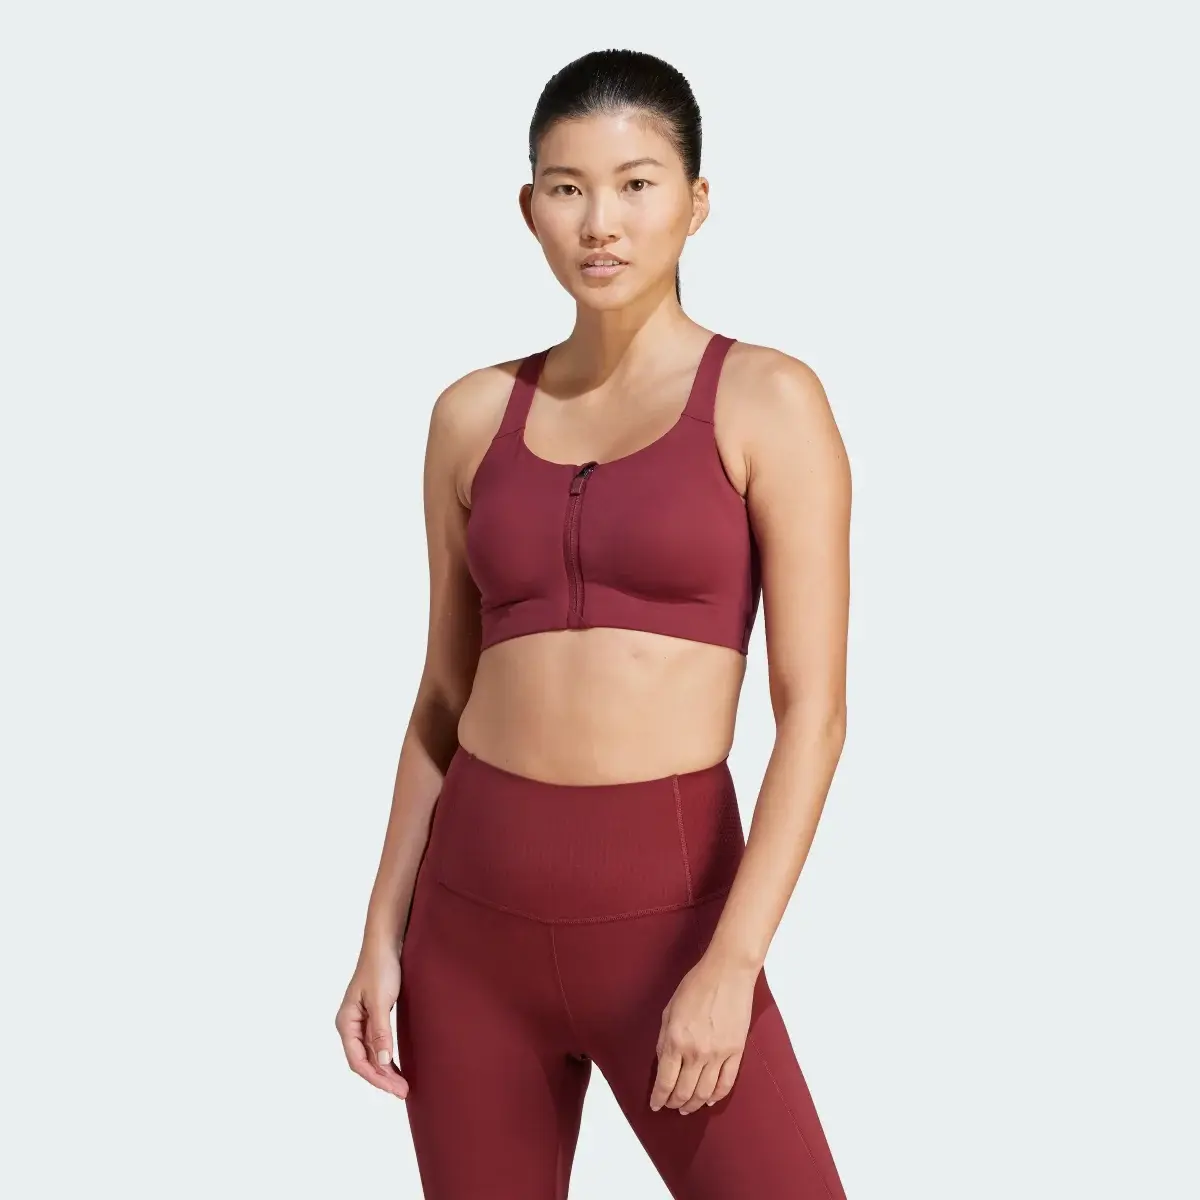 Adidas Brassière zippée maintien fort TLRD Impact Luxe. 2